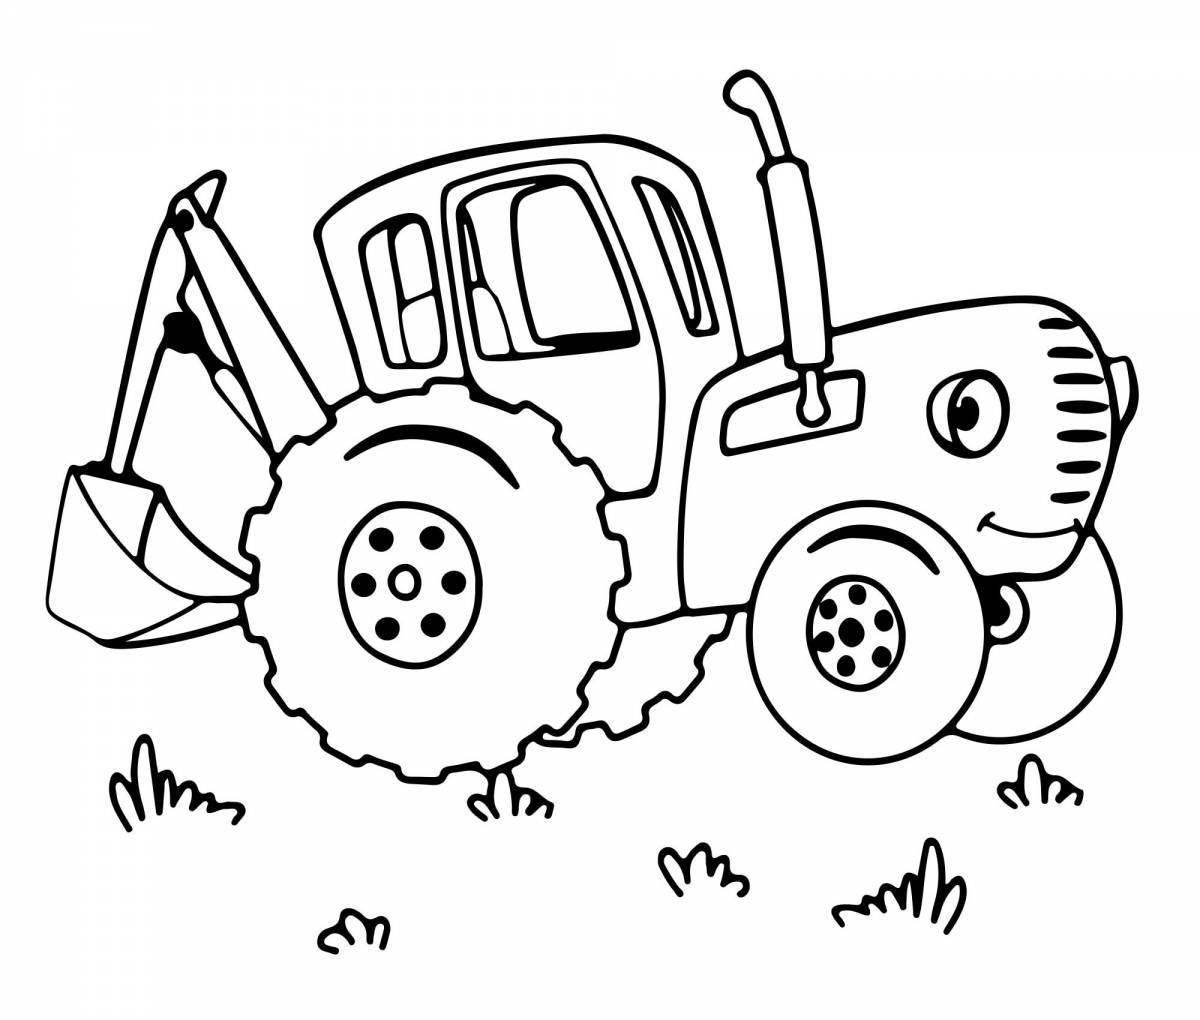 Coloring book stupid blue tractor